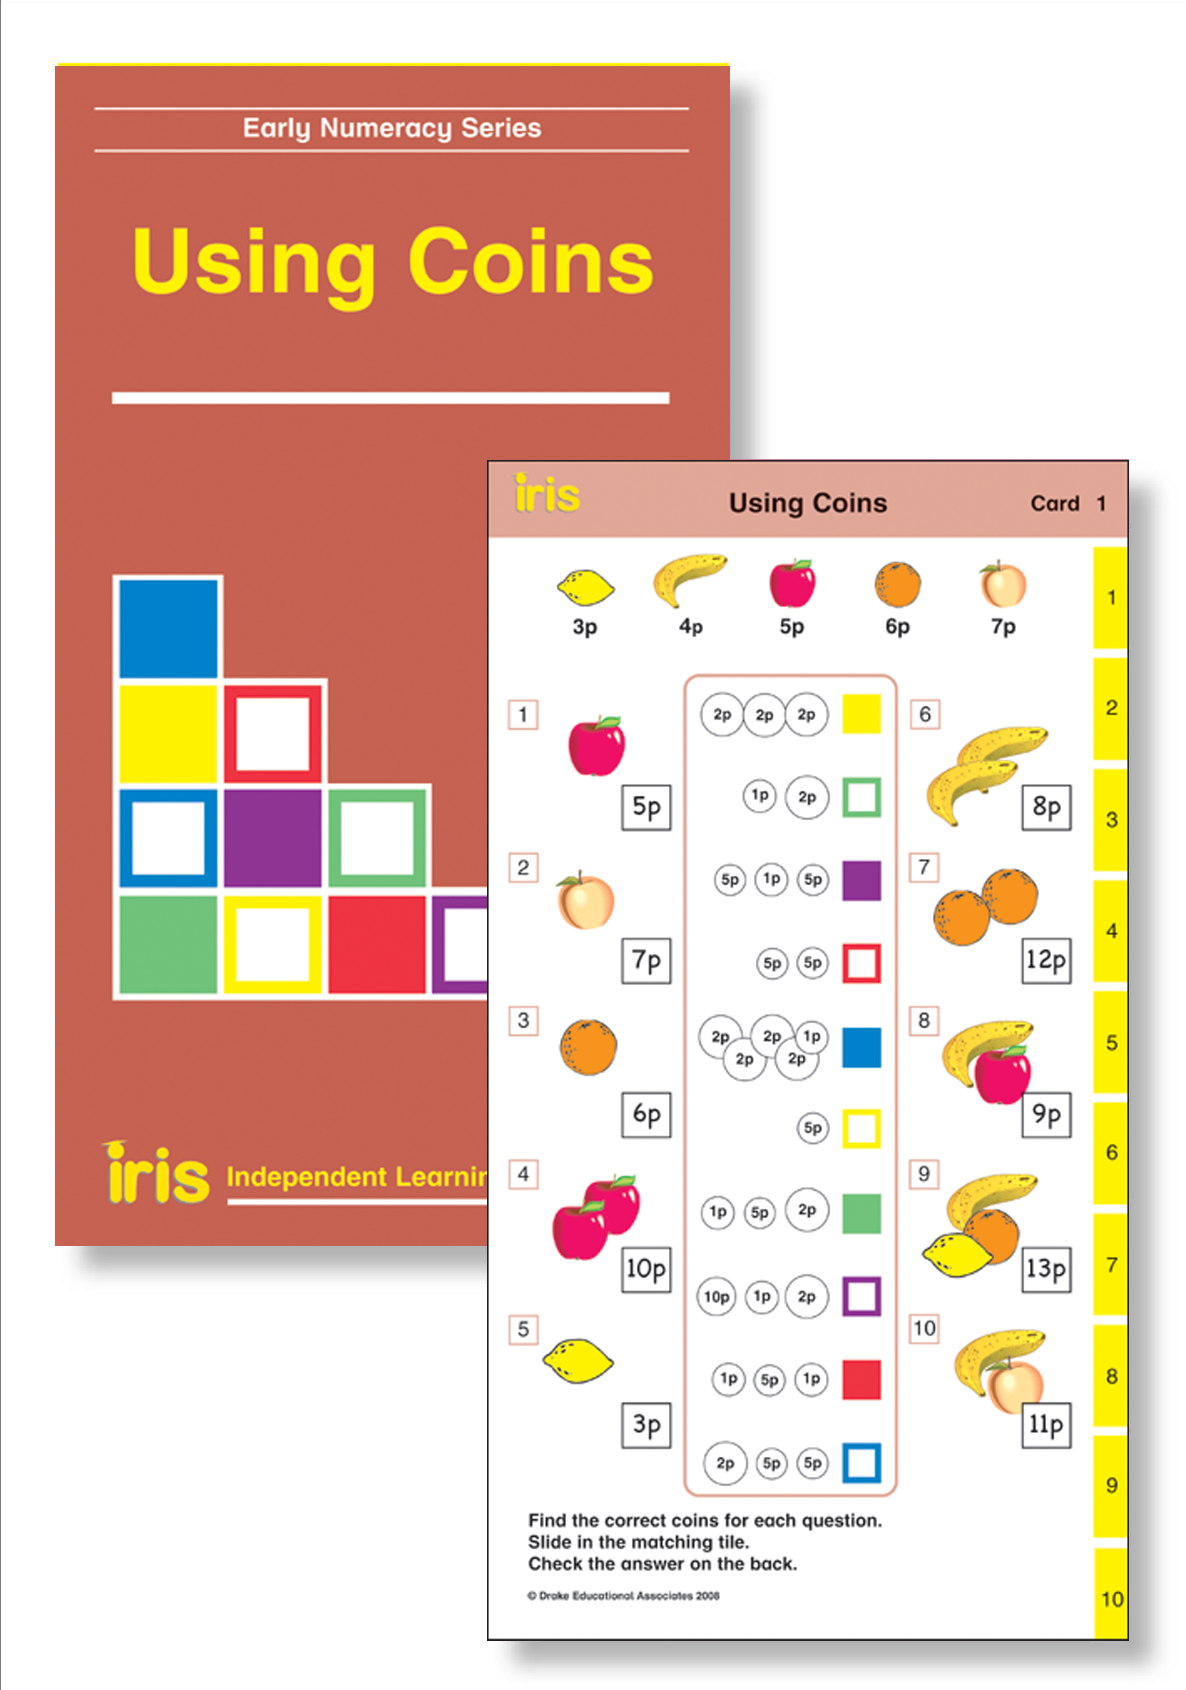 Iris Study Cards: Early Numeracy Year 1 - Using Coins